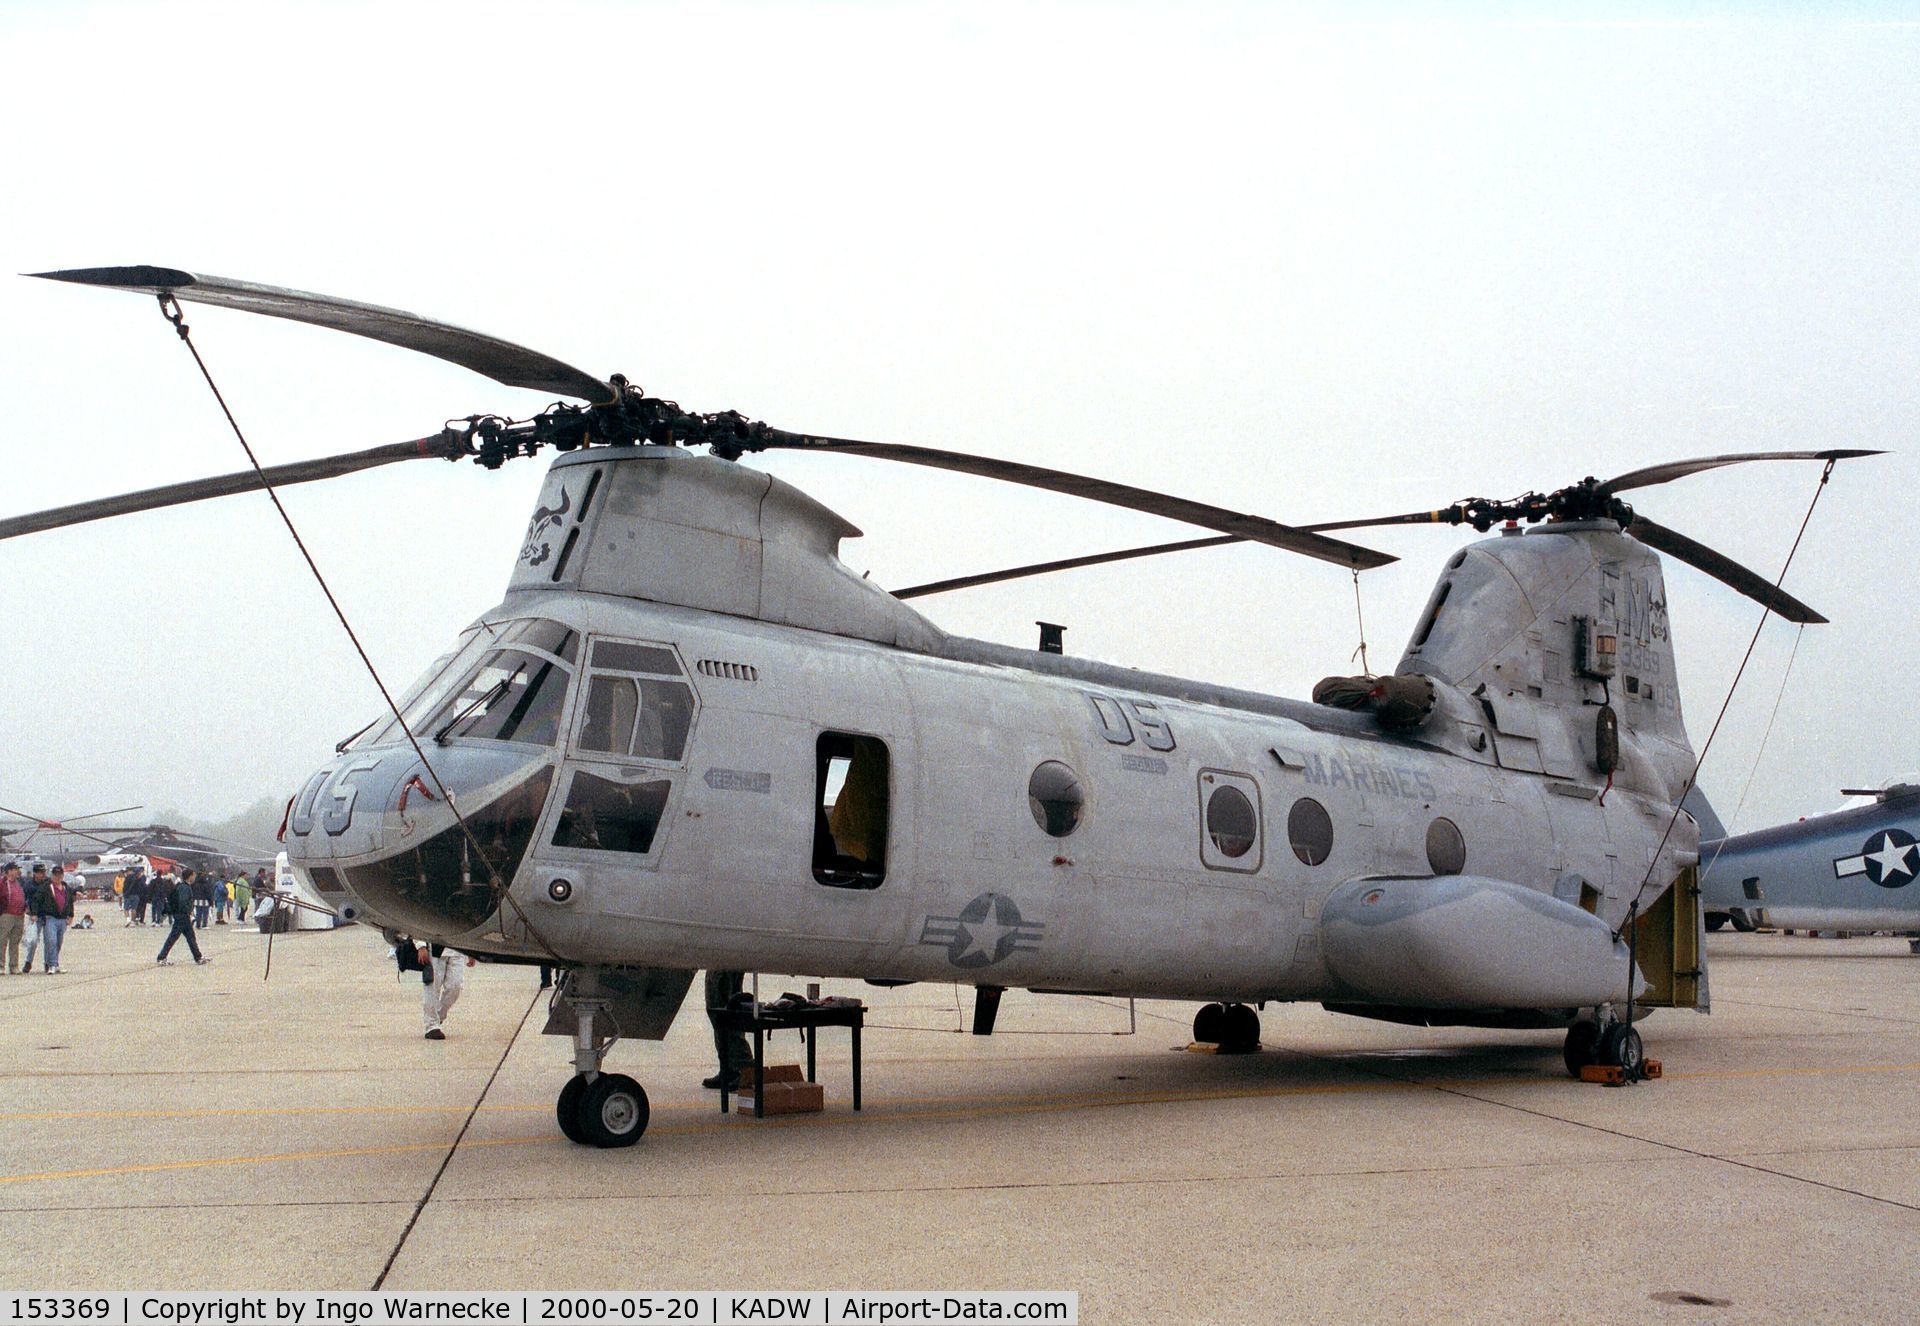 153369, Boeing Vertol CH-46E Sea Knight C/N 2265, Boeing Vertol CH-46E Sea Knight of the USMC at Andrews AFB during Armed Forces Day